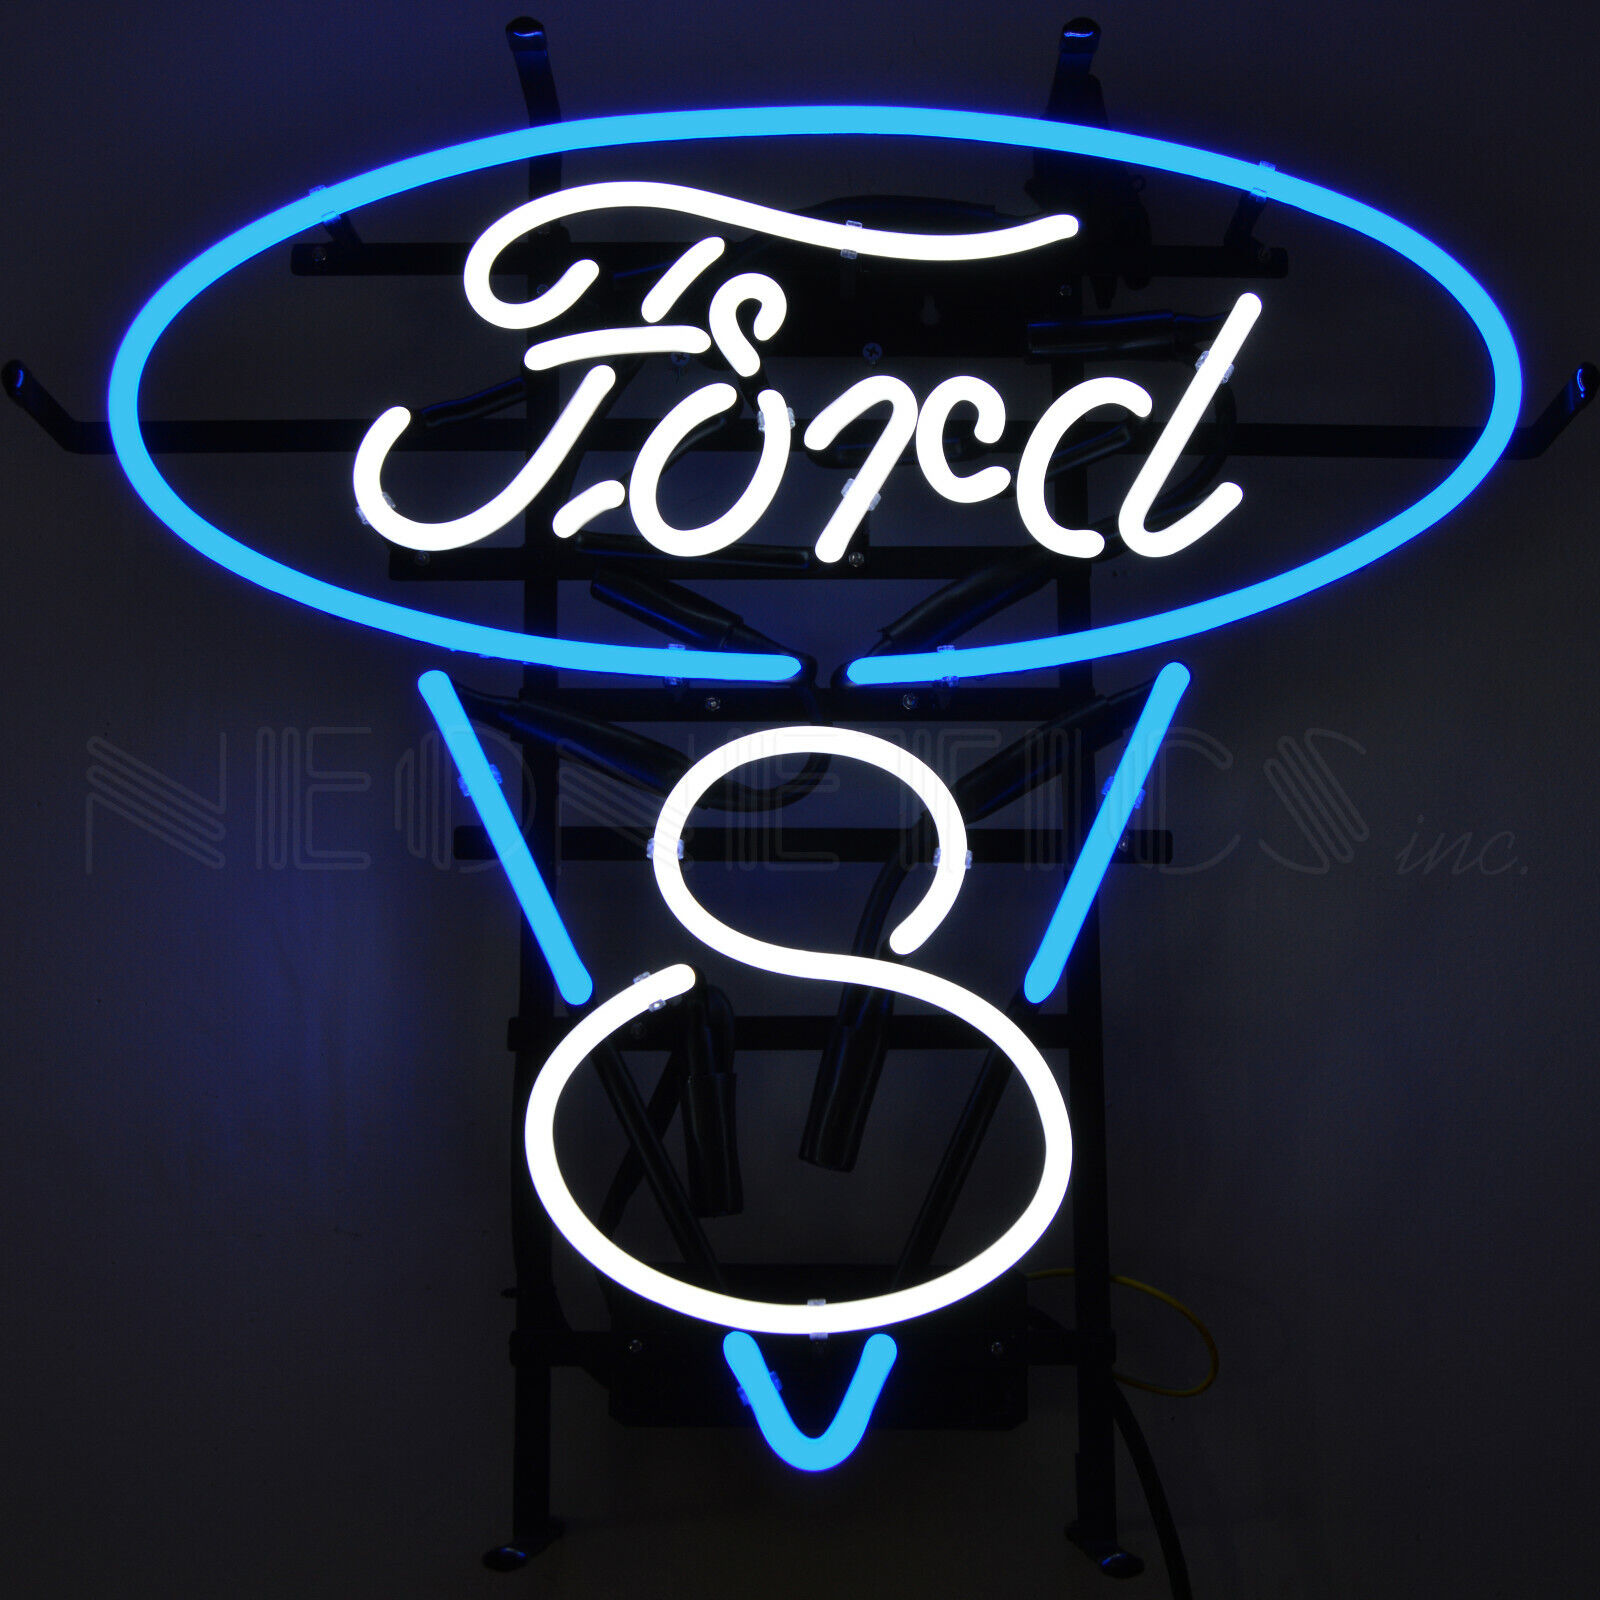 Ford V8 Neon sign Cougar Eight 1950 Truck Dads Garage wall lamp Comet Cyclone 